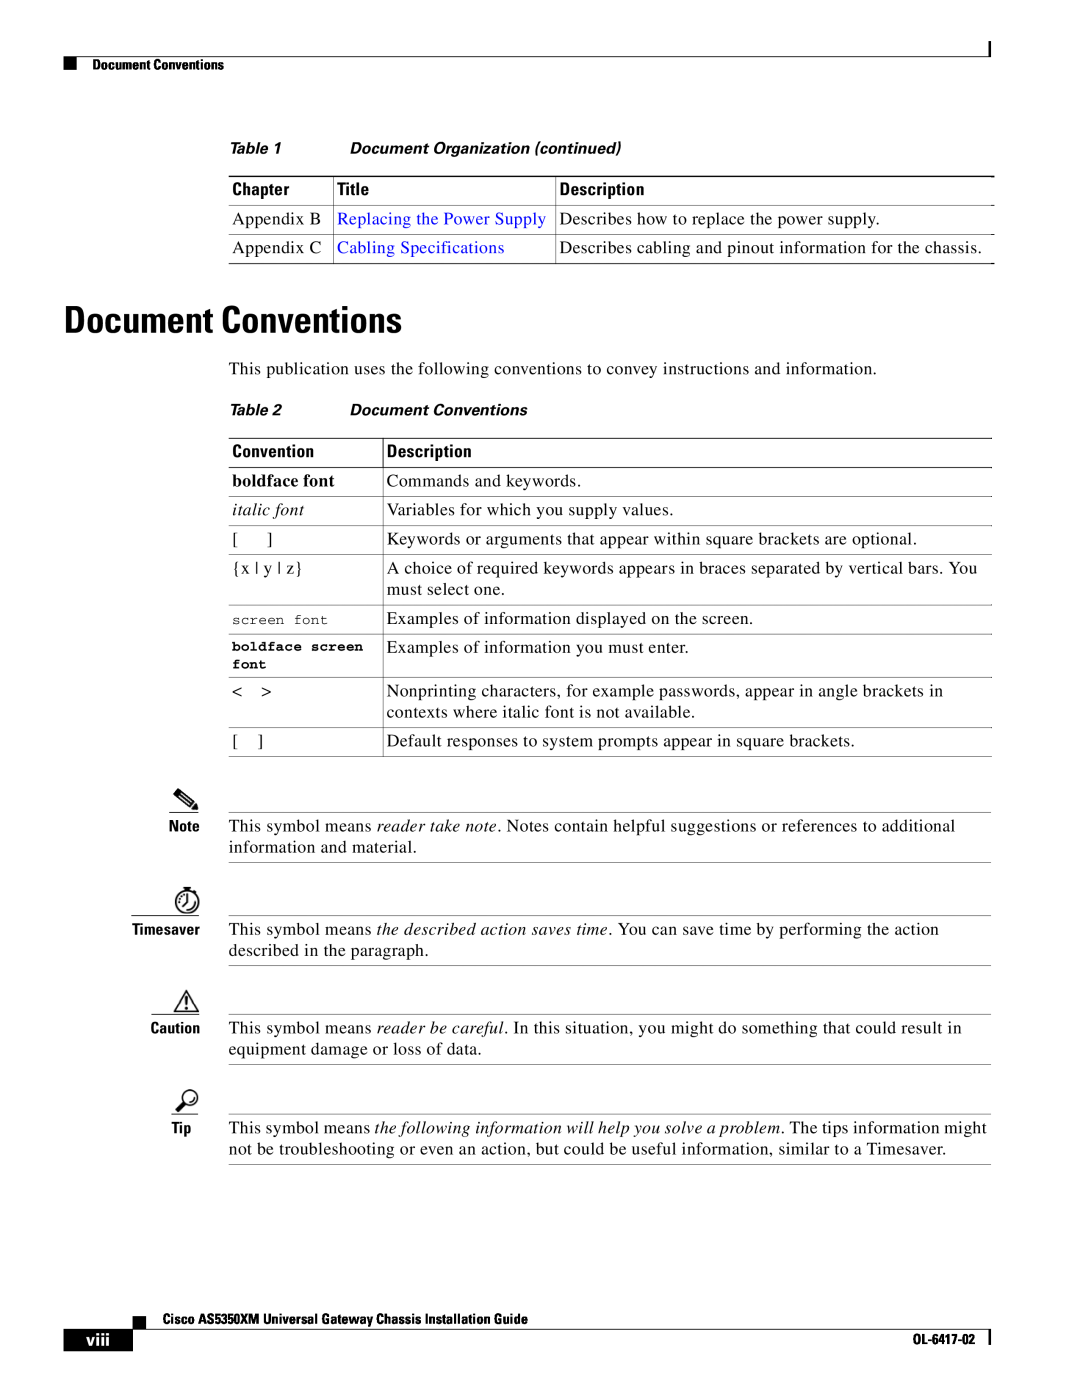 Cisco Systems AS5350XM manual Document Conventions, Replacing the Power Supply, Cabling Specifications, italic font, viii 